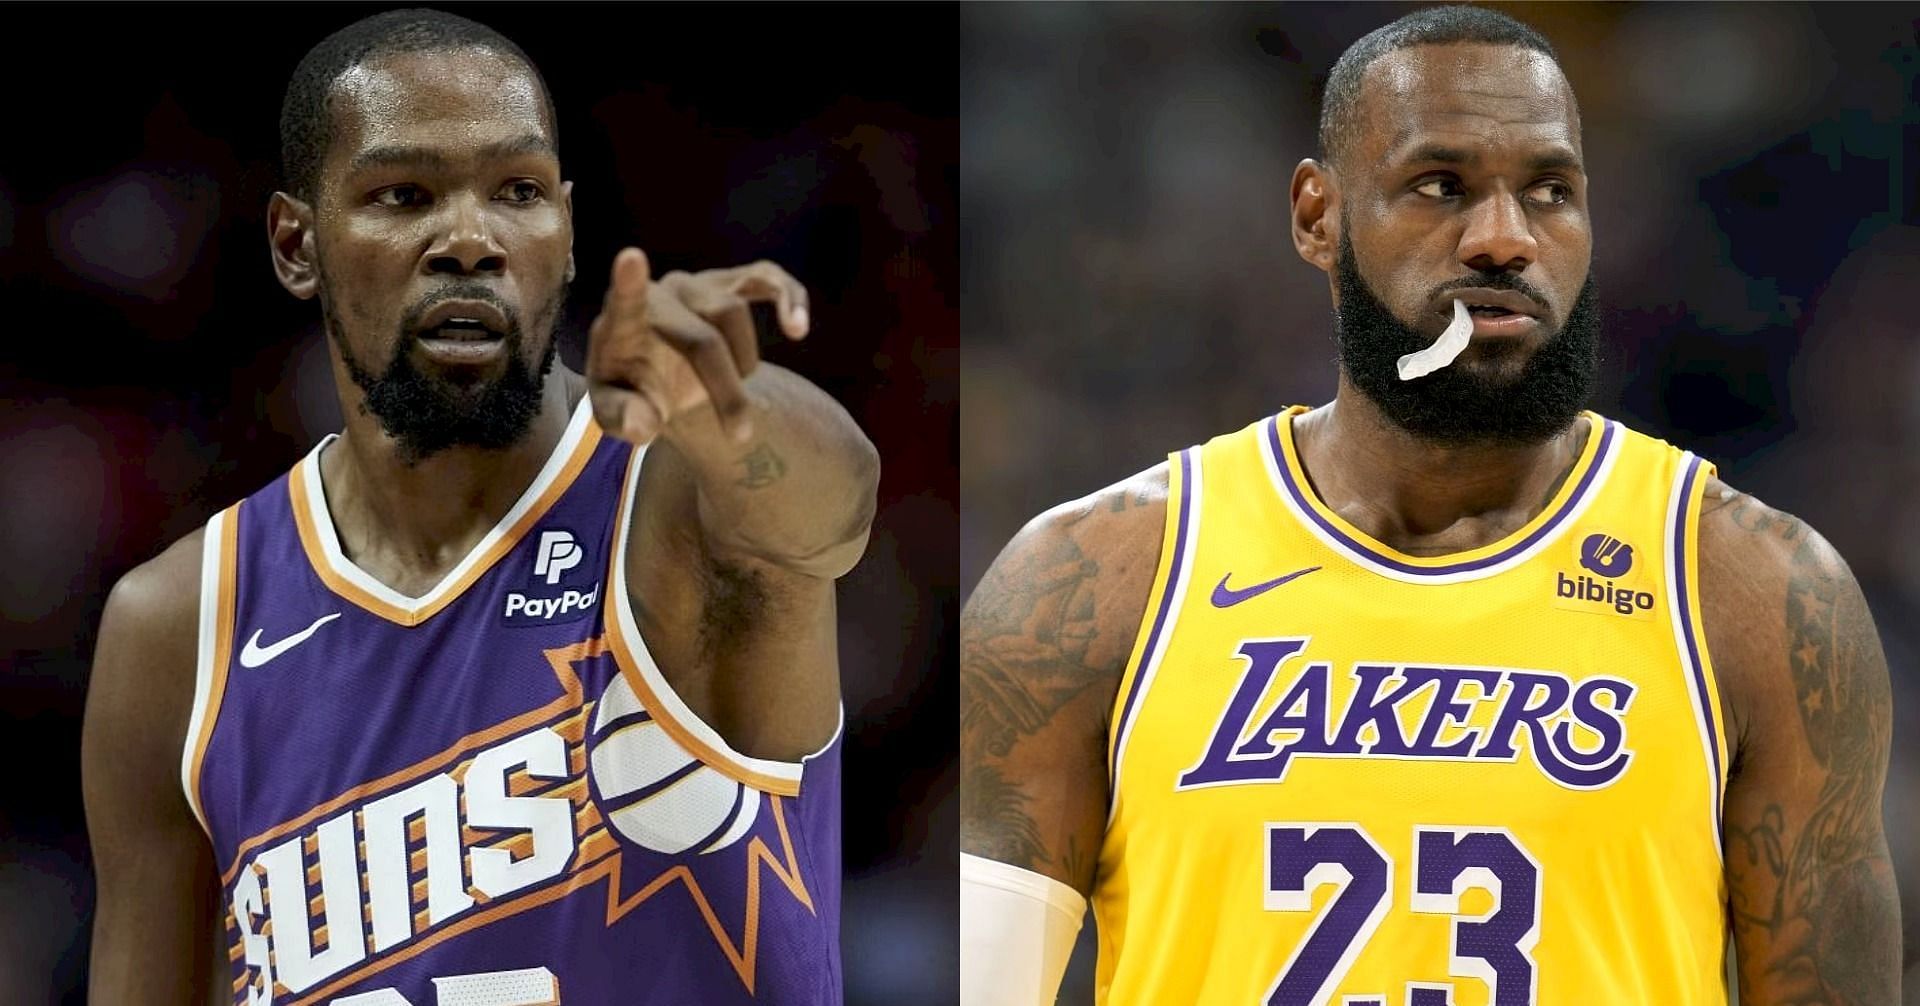 Phoenix Suns and LA Lakers superstar forwards Kevin Durant and LeBron James